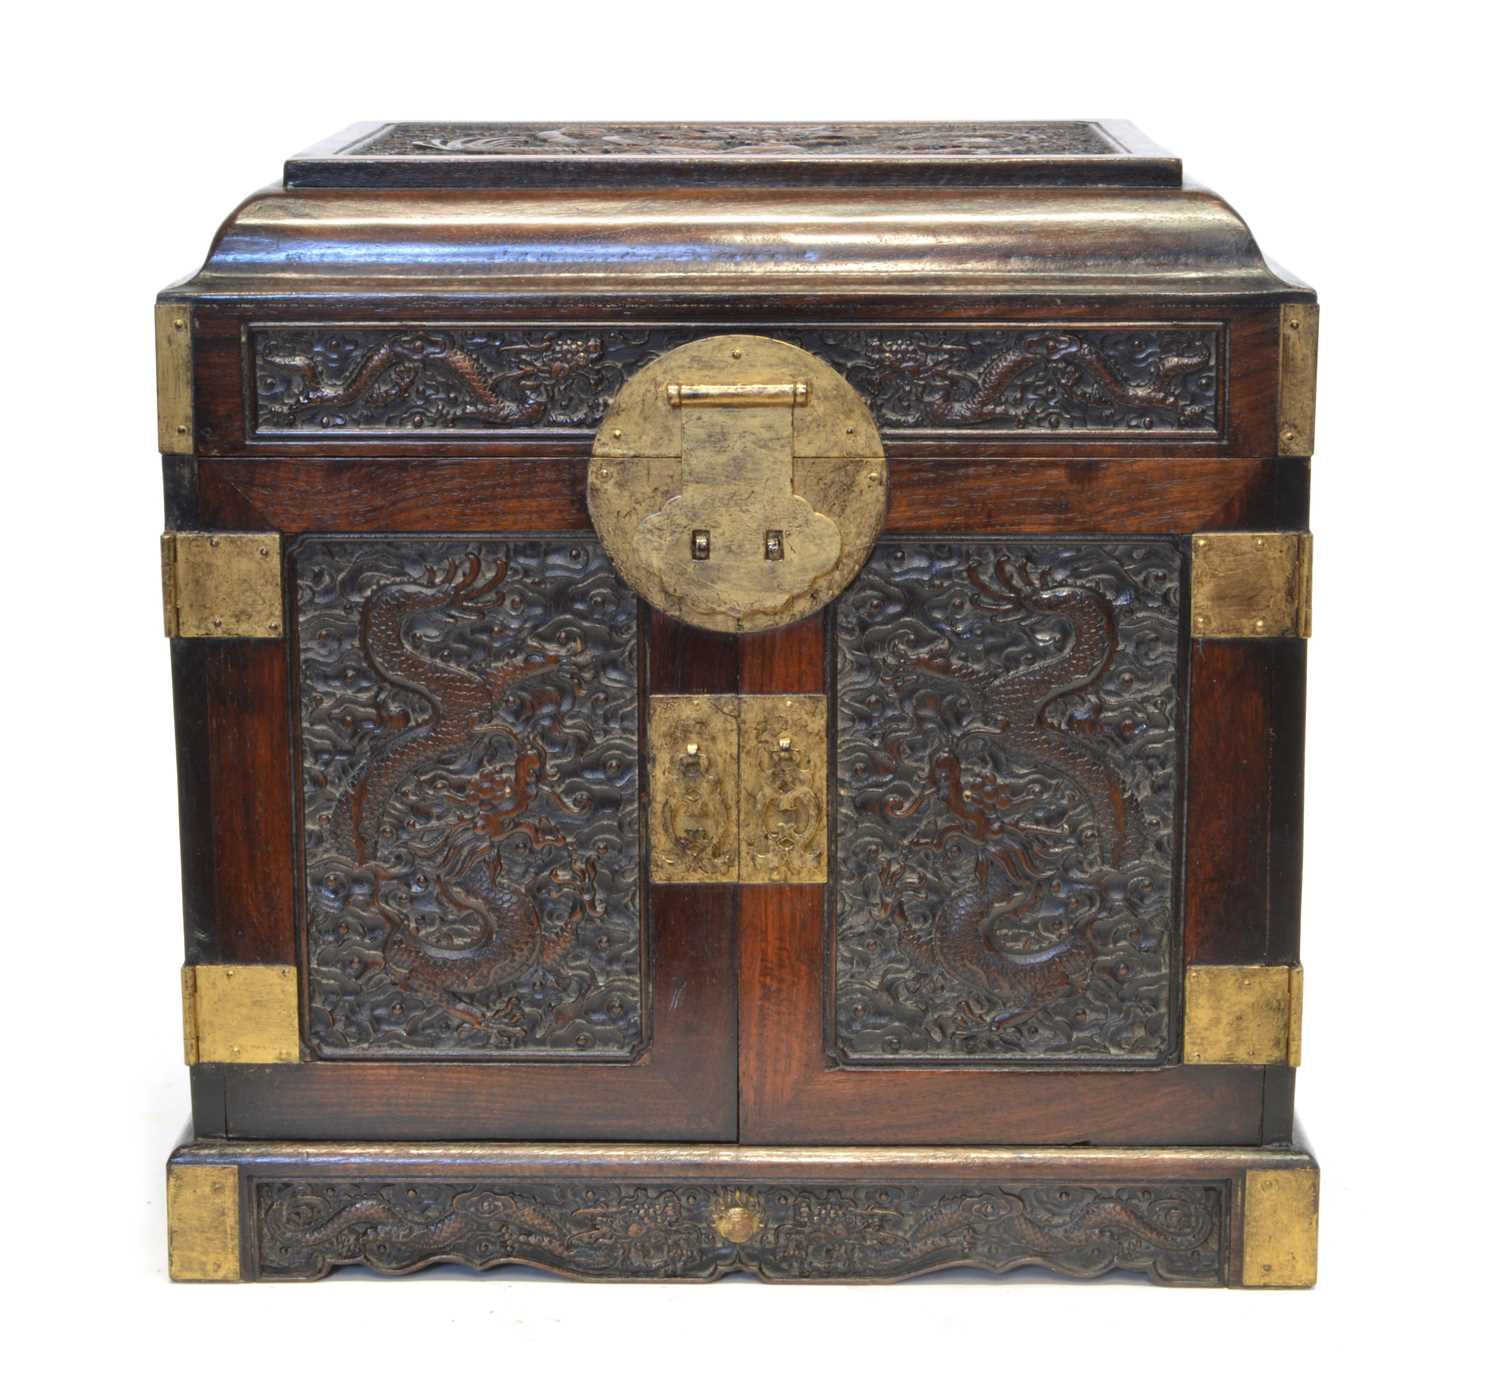 Lot 224 - Chinese brass bound jewellery travel chest